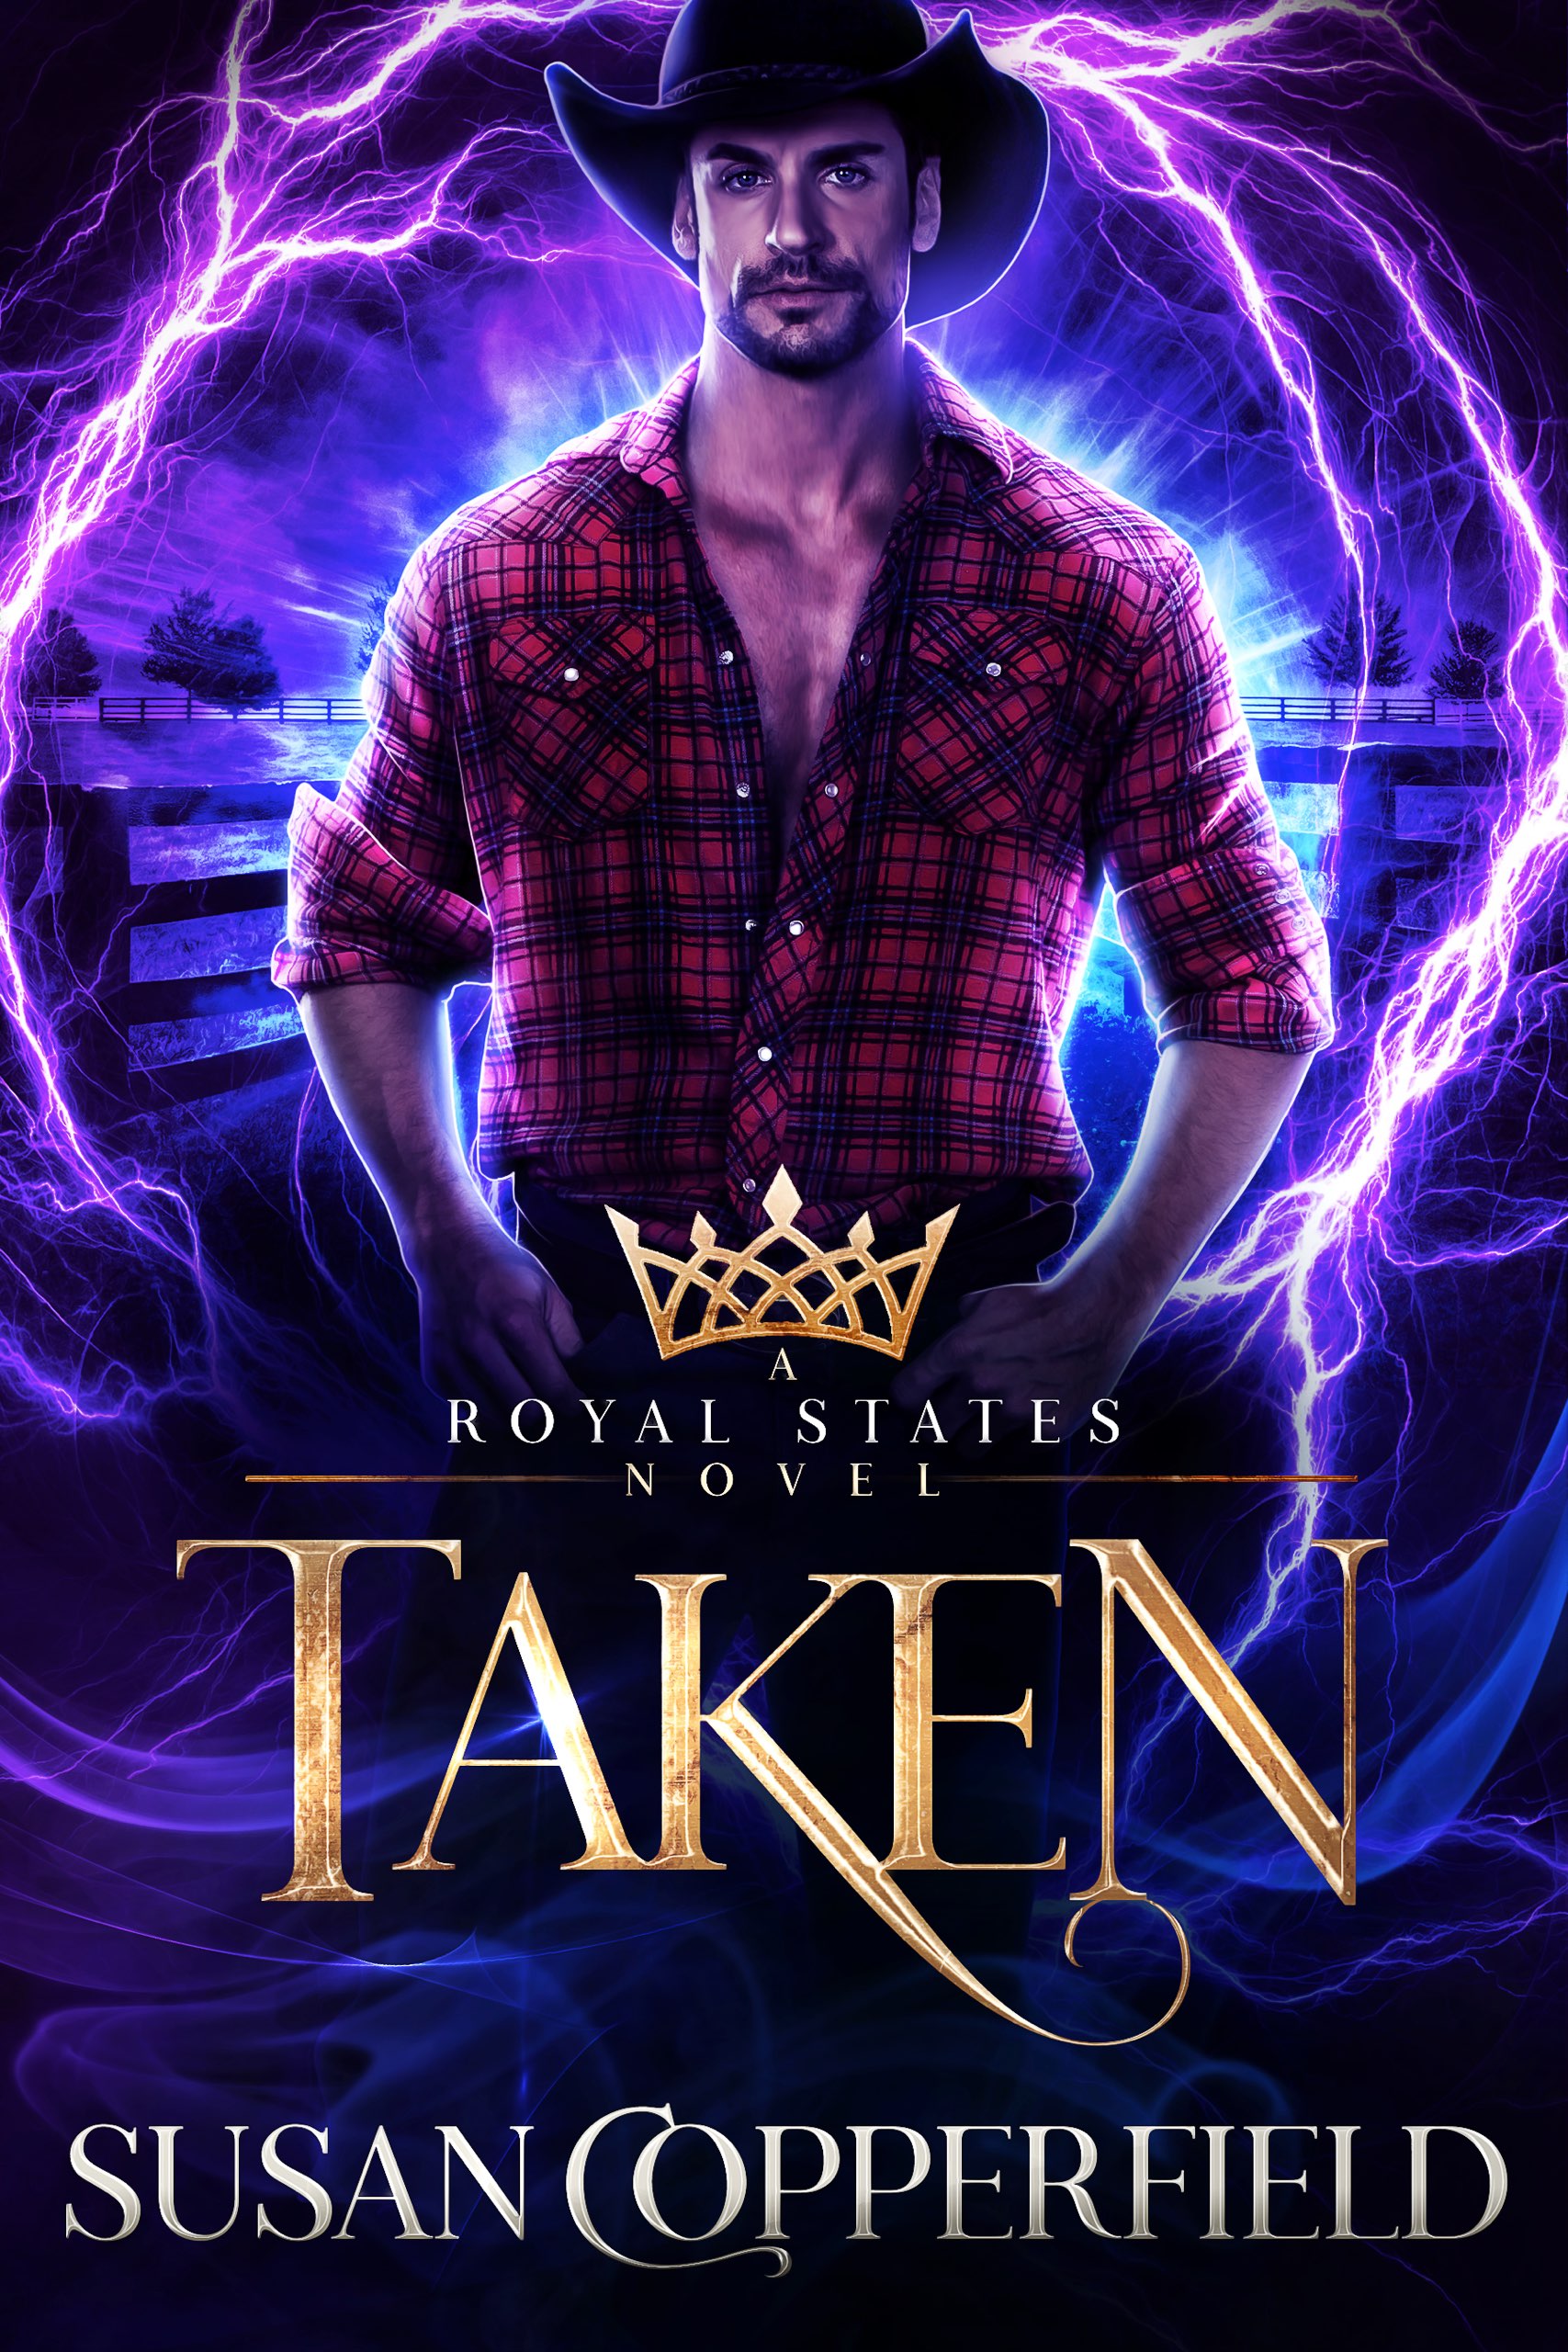 Taken (A Royal States Novel by Susan Copperfield) has released!